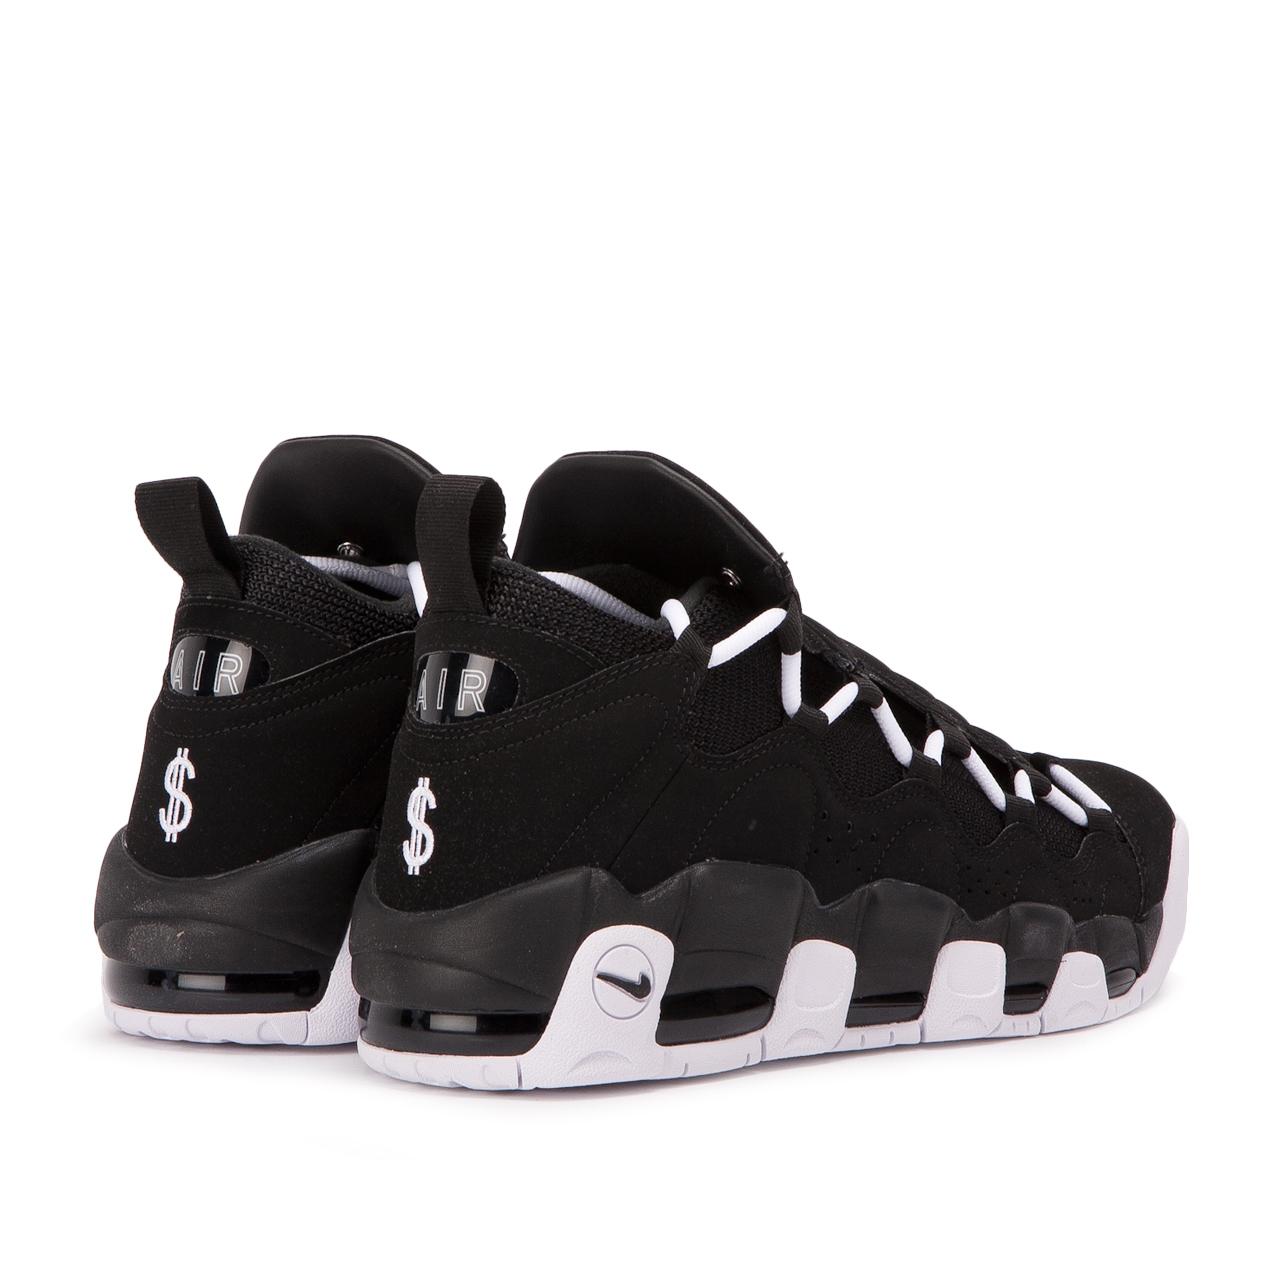 Nike Suede Air More Money Shoes in Black White (Black) for Men - Save 46% -  Lyst